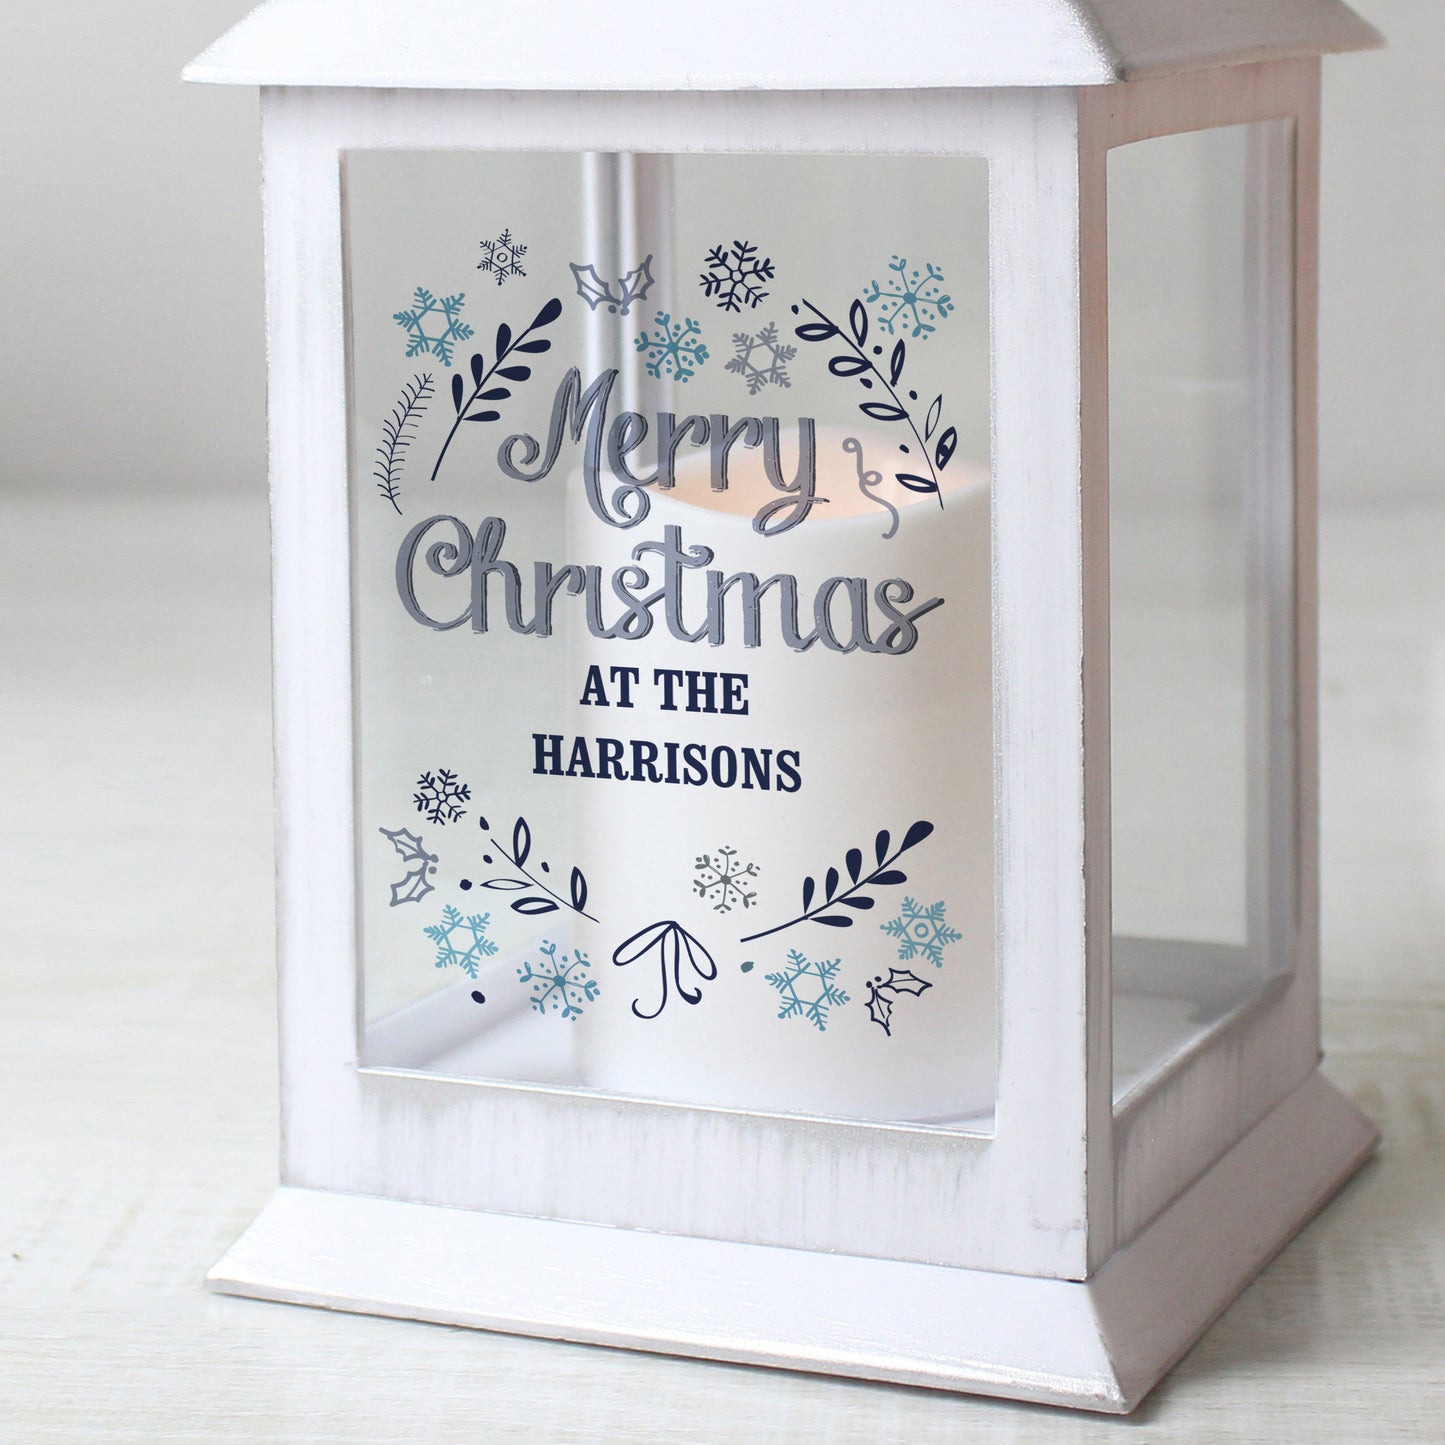 Personalised Christmas Frost White Lantern - Personalise It!